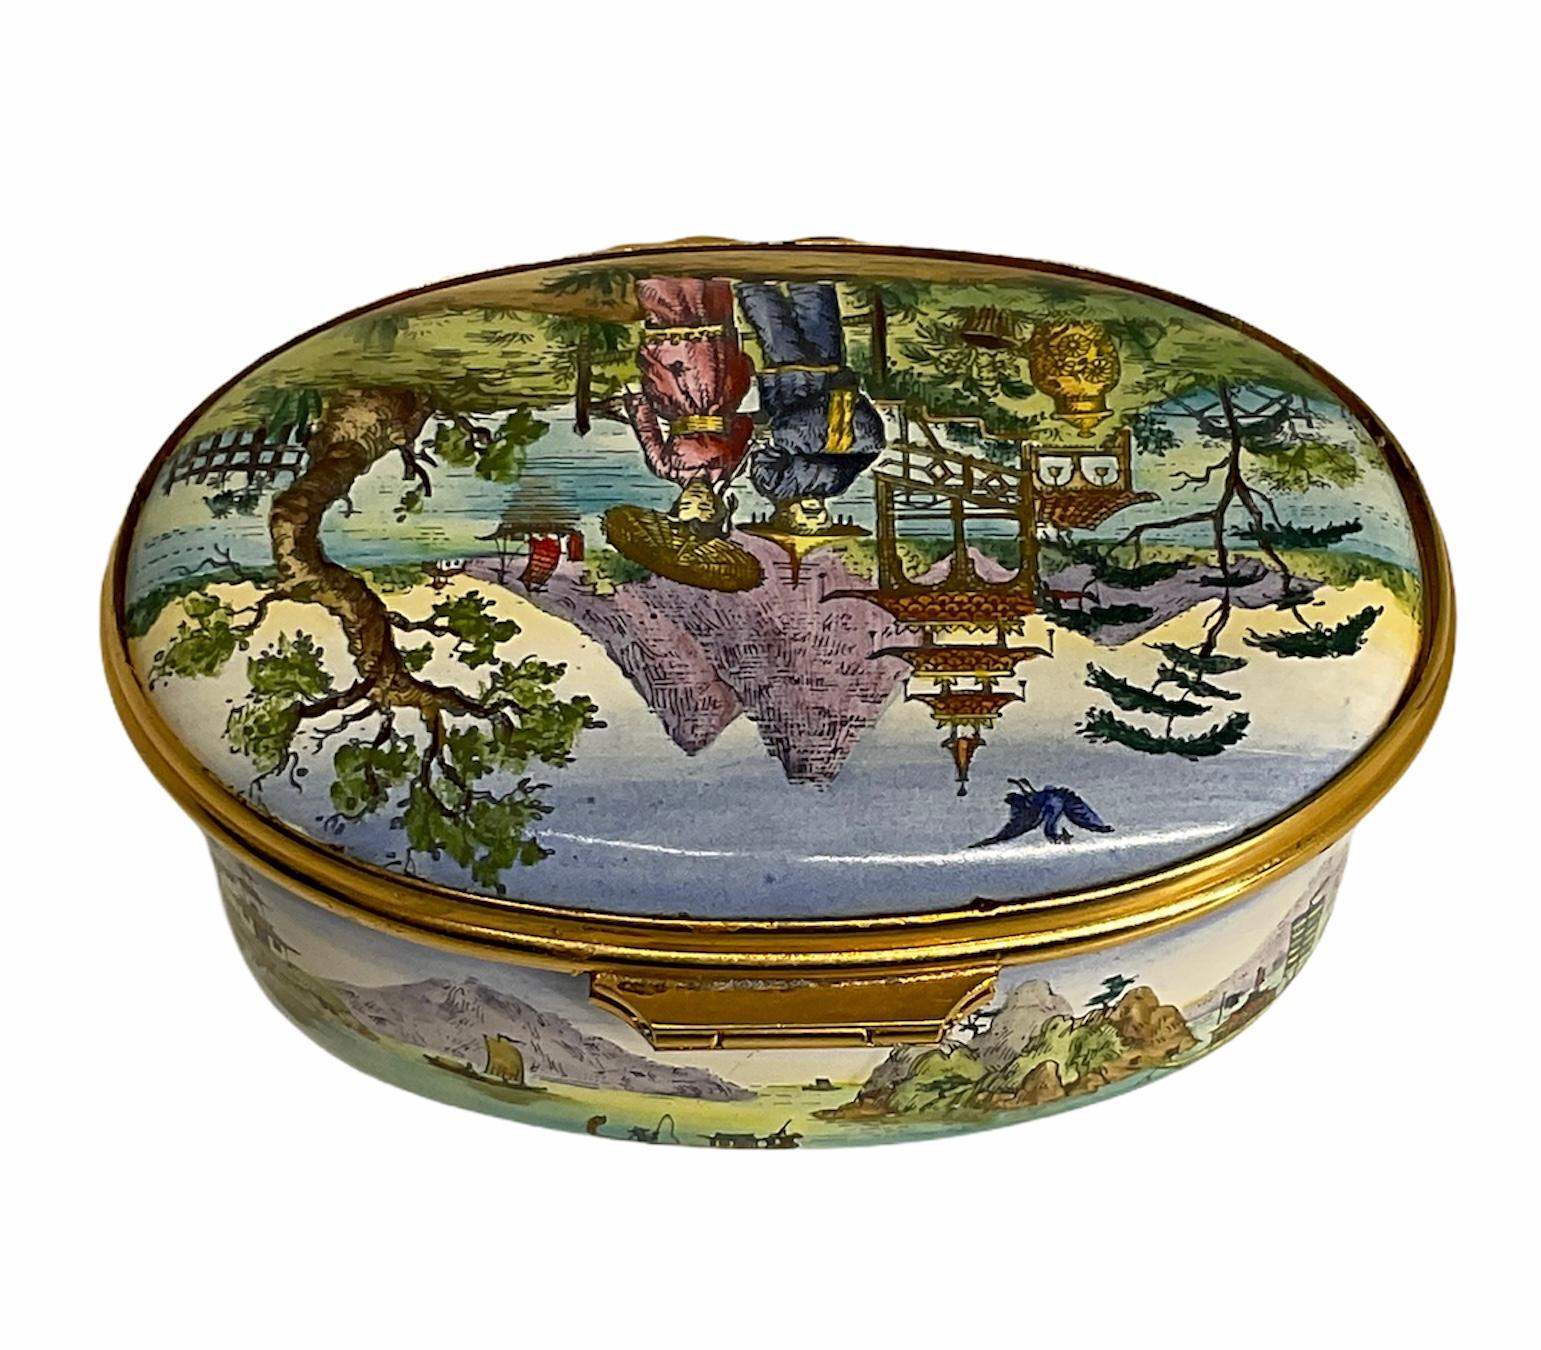 This is a Cartier hand painted enamel porcelain oval trinket box. It depicts an East Asian landscape with a couple wearing oriental outfits in the front of the lid. Also, there is an East Asian sea with ships landscape hand painted around the base.